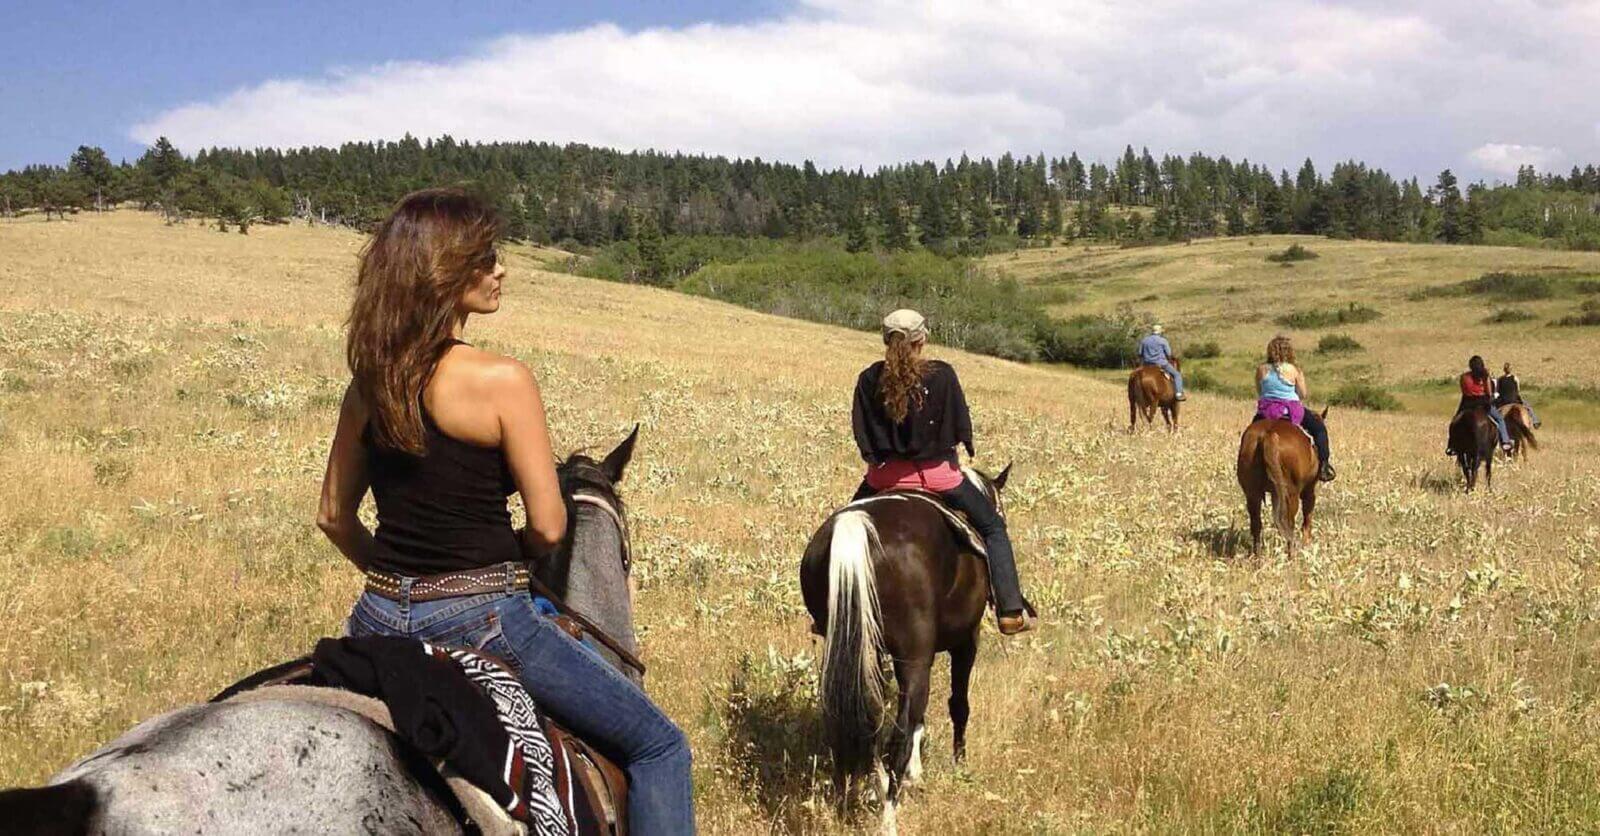 A group of people riding horses through the grass.